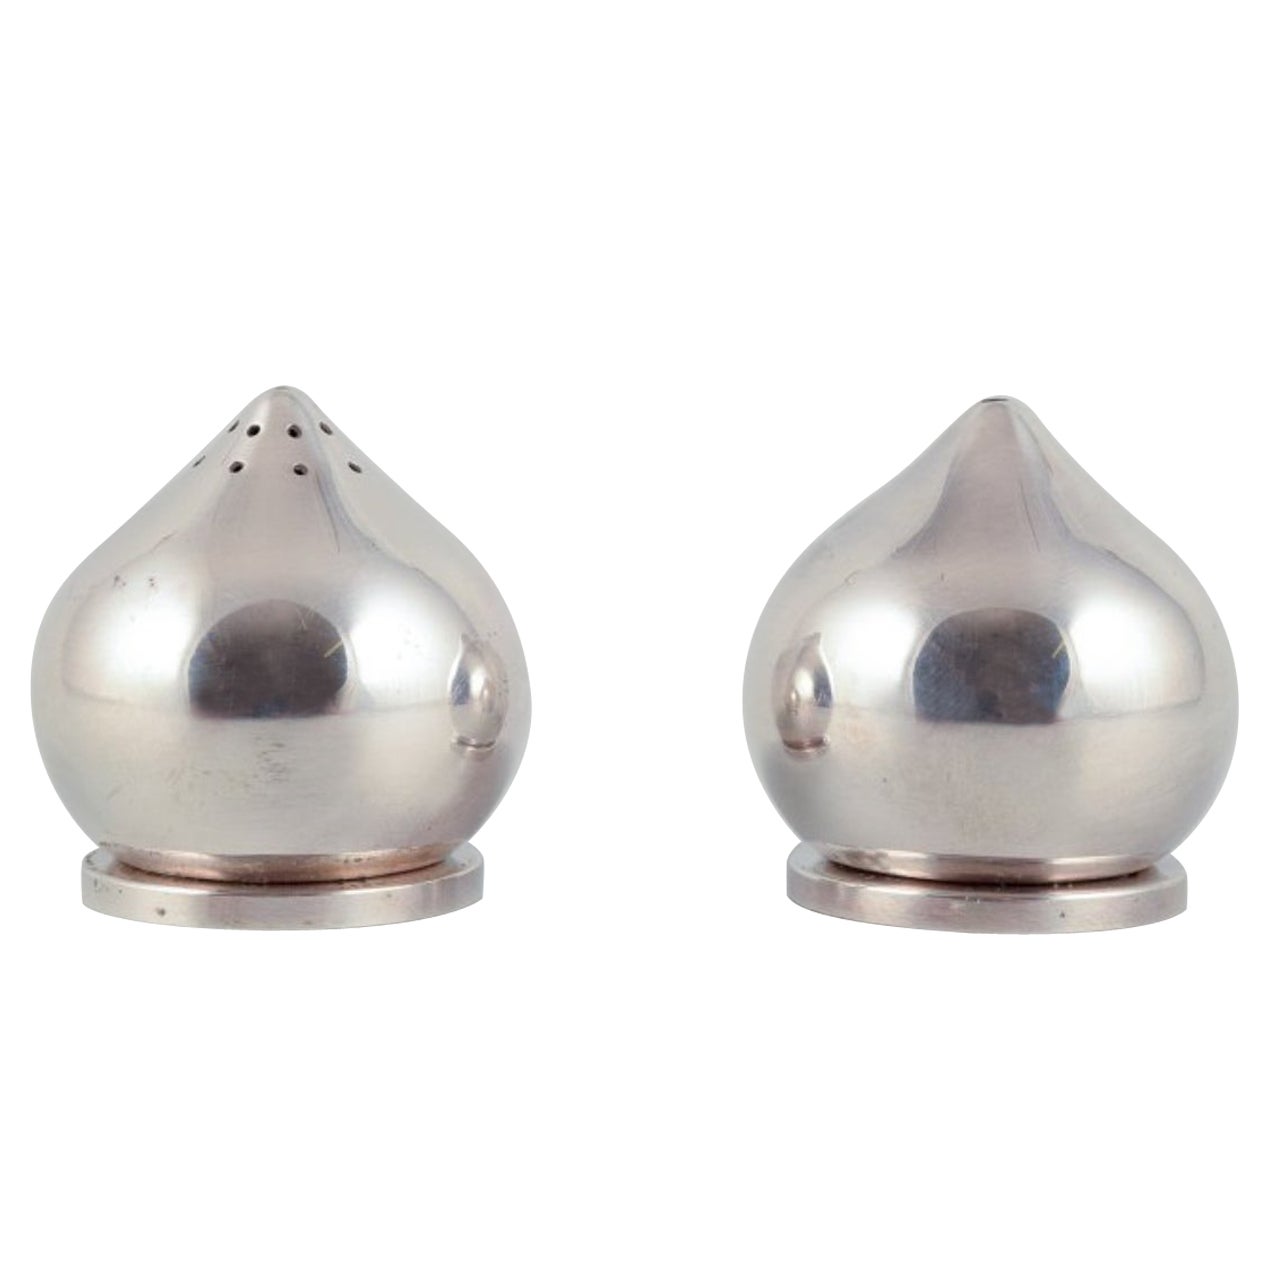 Aage Weimar, Danish silversmith.  A pair of modernist salt and pepper shakers.